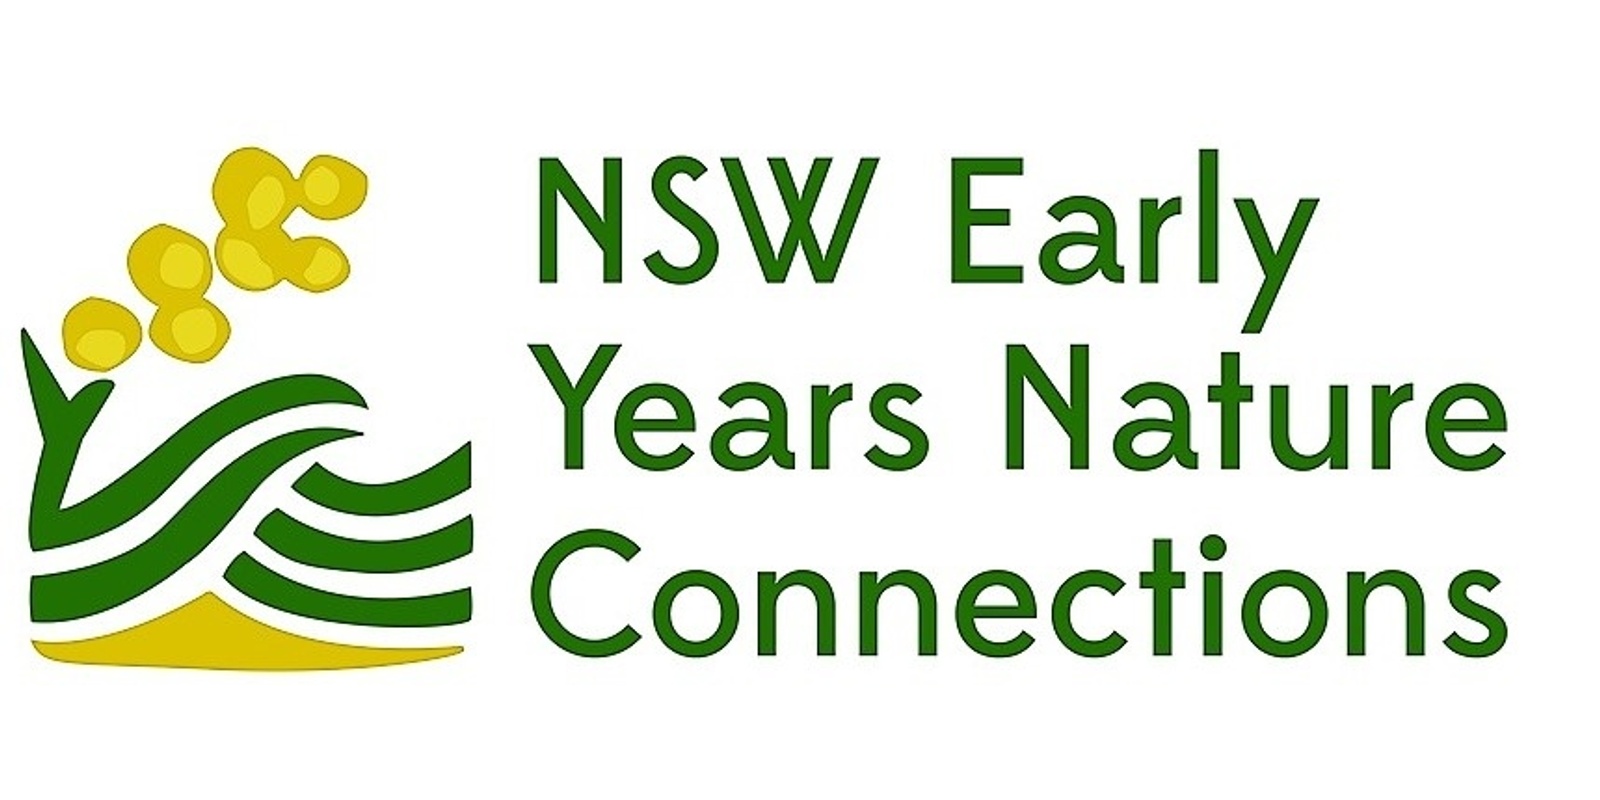 Early Years Nature Connections: The 'why' and 'how' of a nature play program